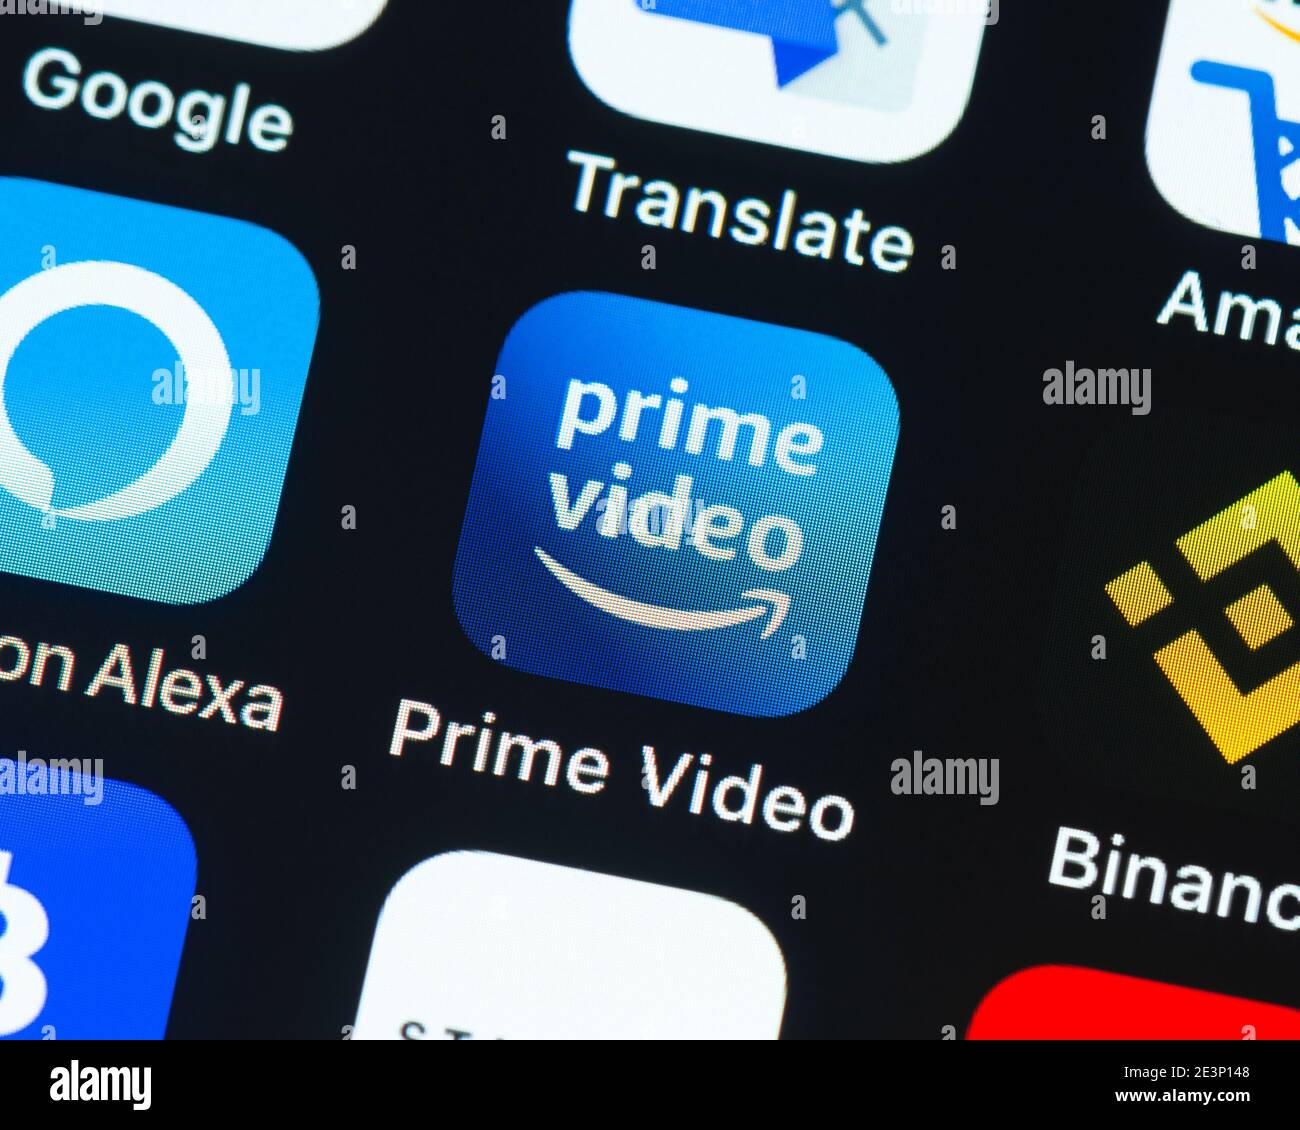 Amazon Prime Video Logo High Resolution Stock Photography And Images Alamy